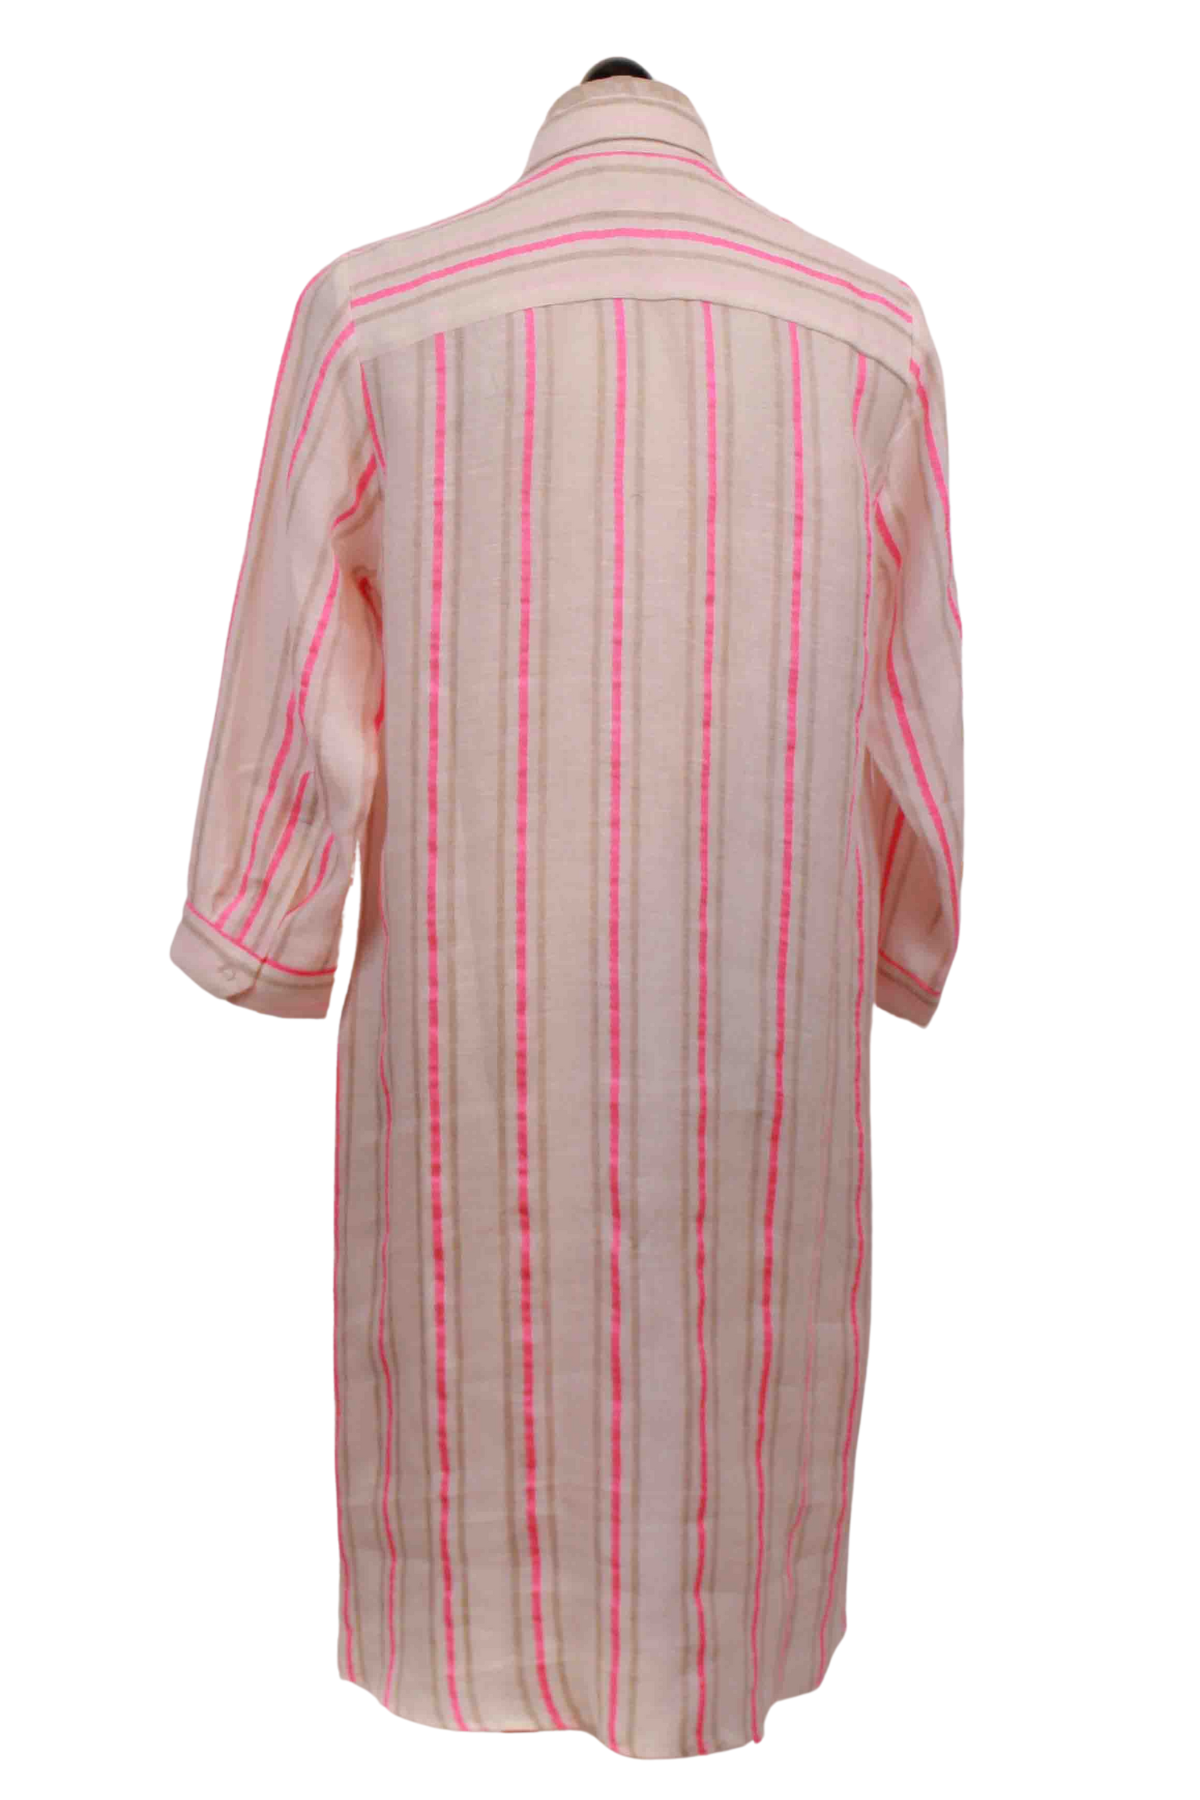 back view of Dover Pink Neon Stripes Dress by Vilagallo